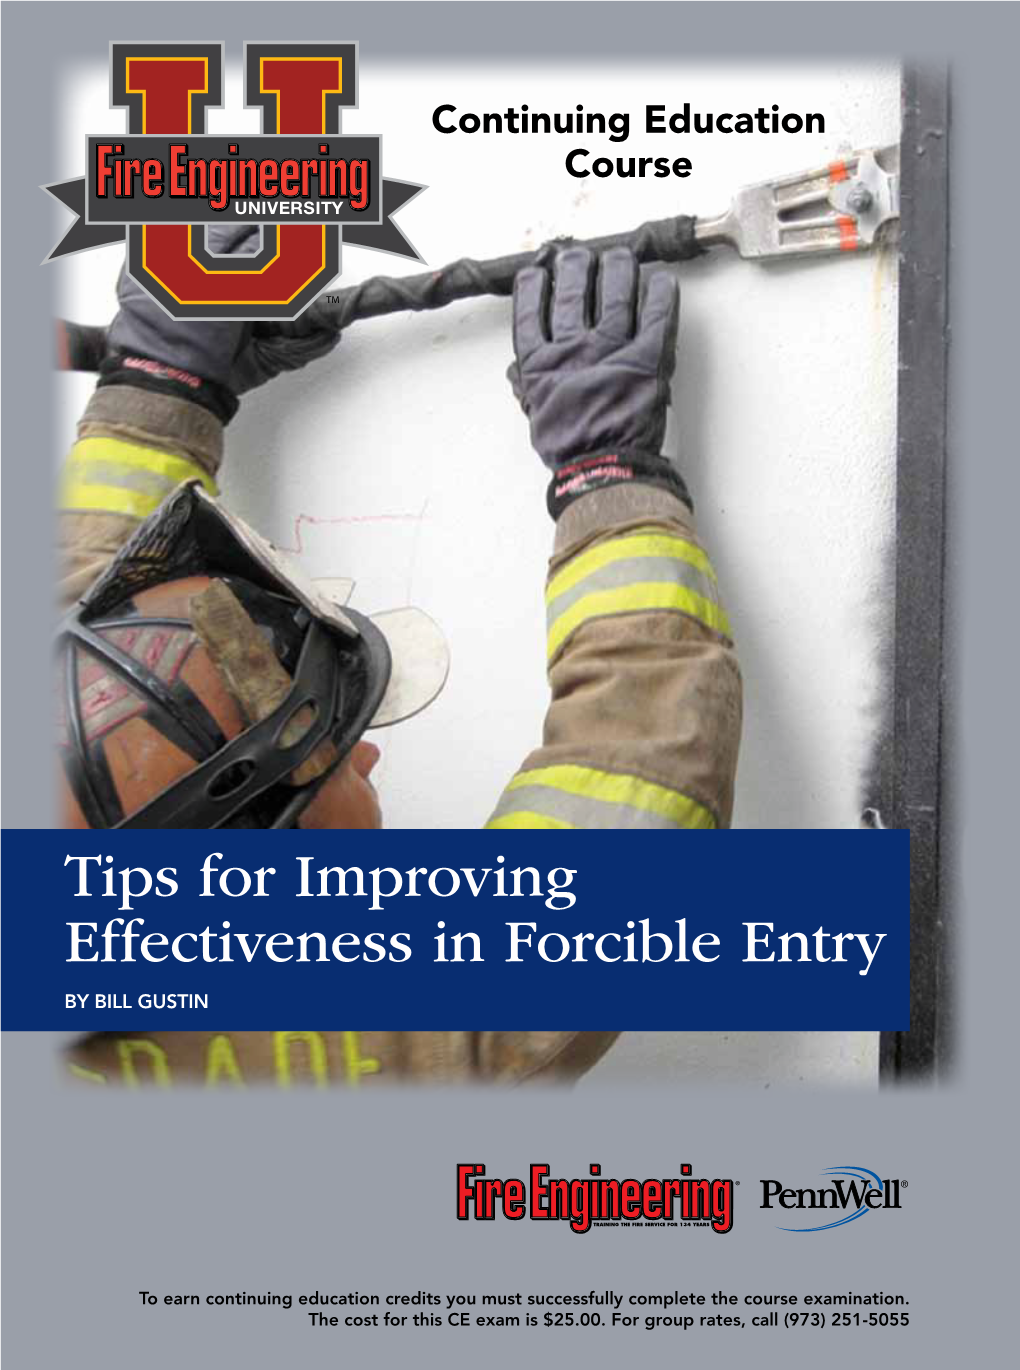 Tips for Improving Effectiveness in Forcible Entry by BILL GUSTIN